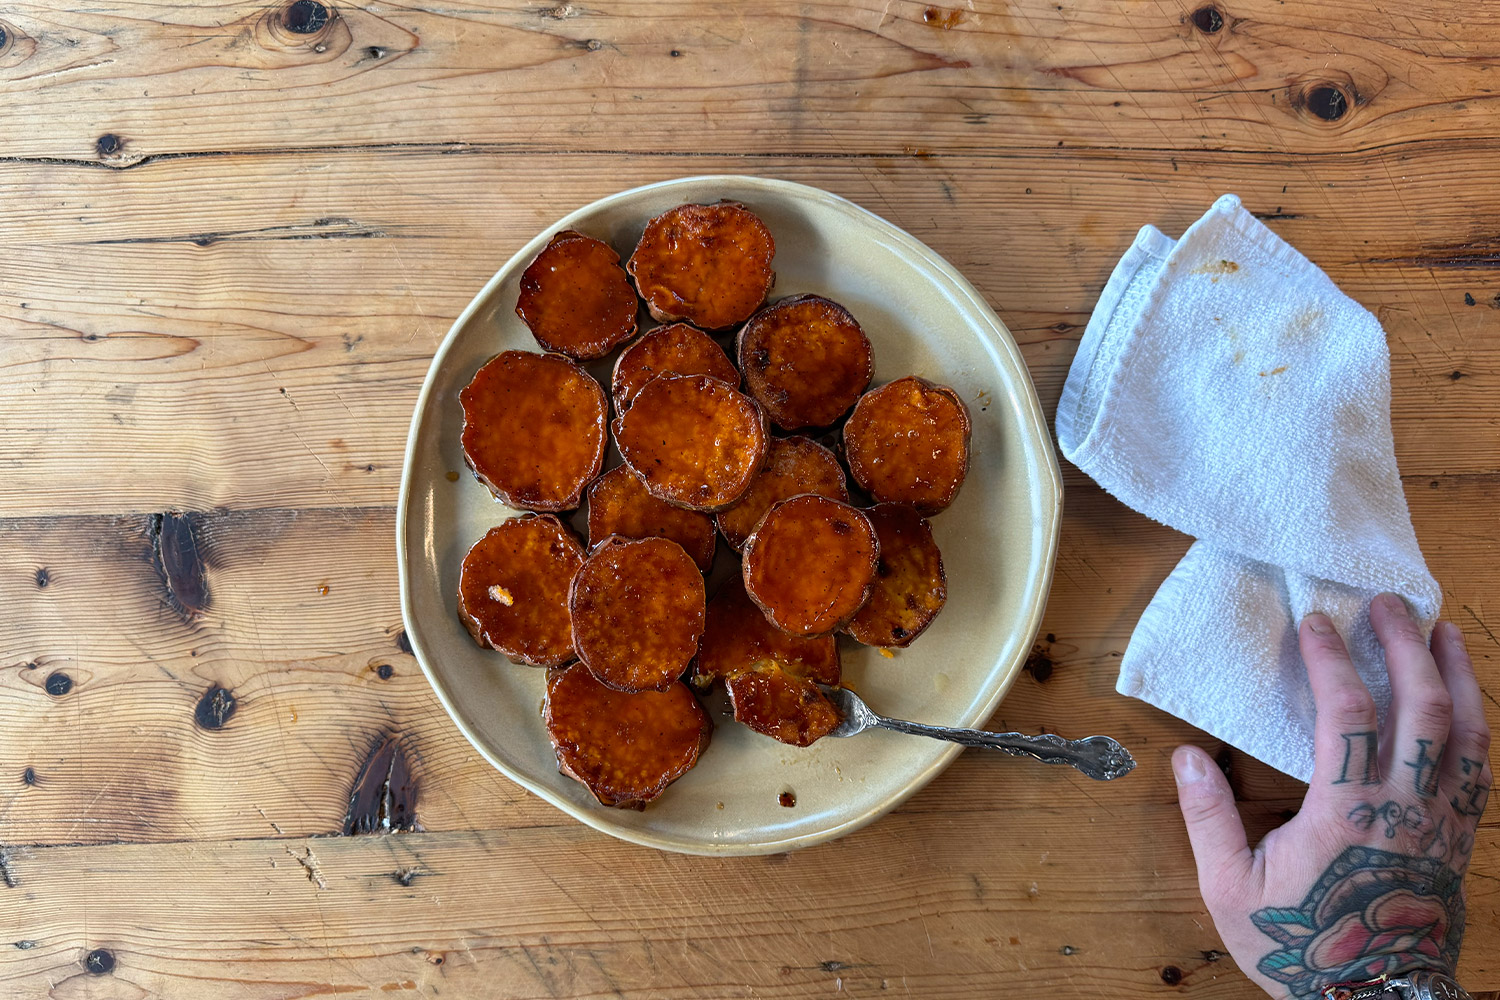 Plate of sweet potatoes with a hand holding a towel on a wood butcher table